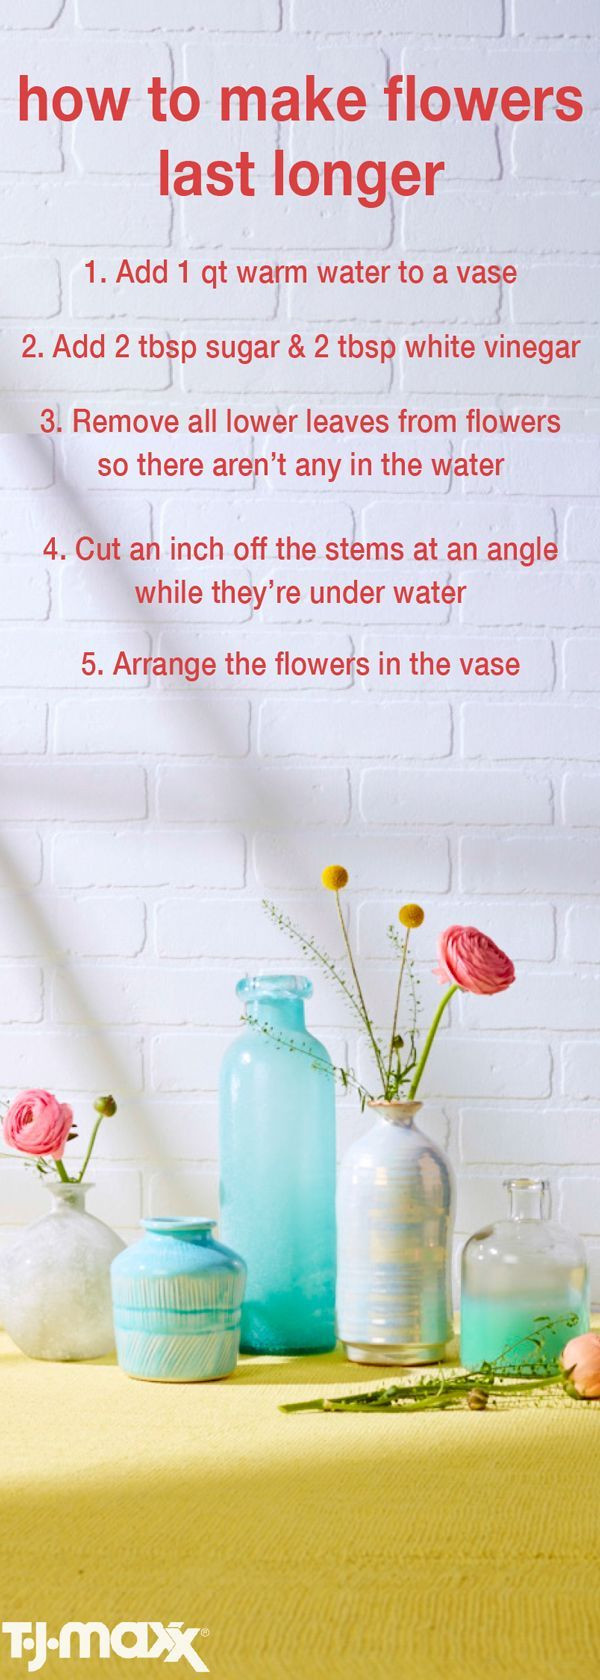 28 Ideal Tj Maxx Vases 2024 free download tj maxx vases of 16 best wedding cake toppers images on pinterest wedding cake regarding most of out your mothers day bouquet this year use the above tips tricks to keep your flowers fresher